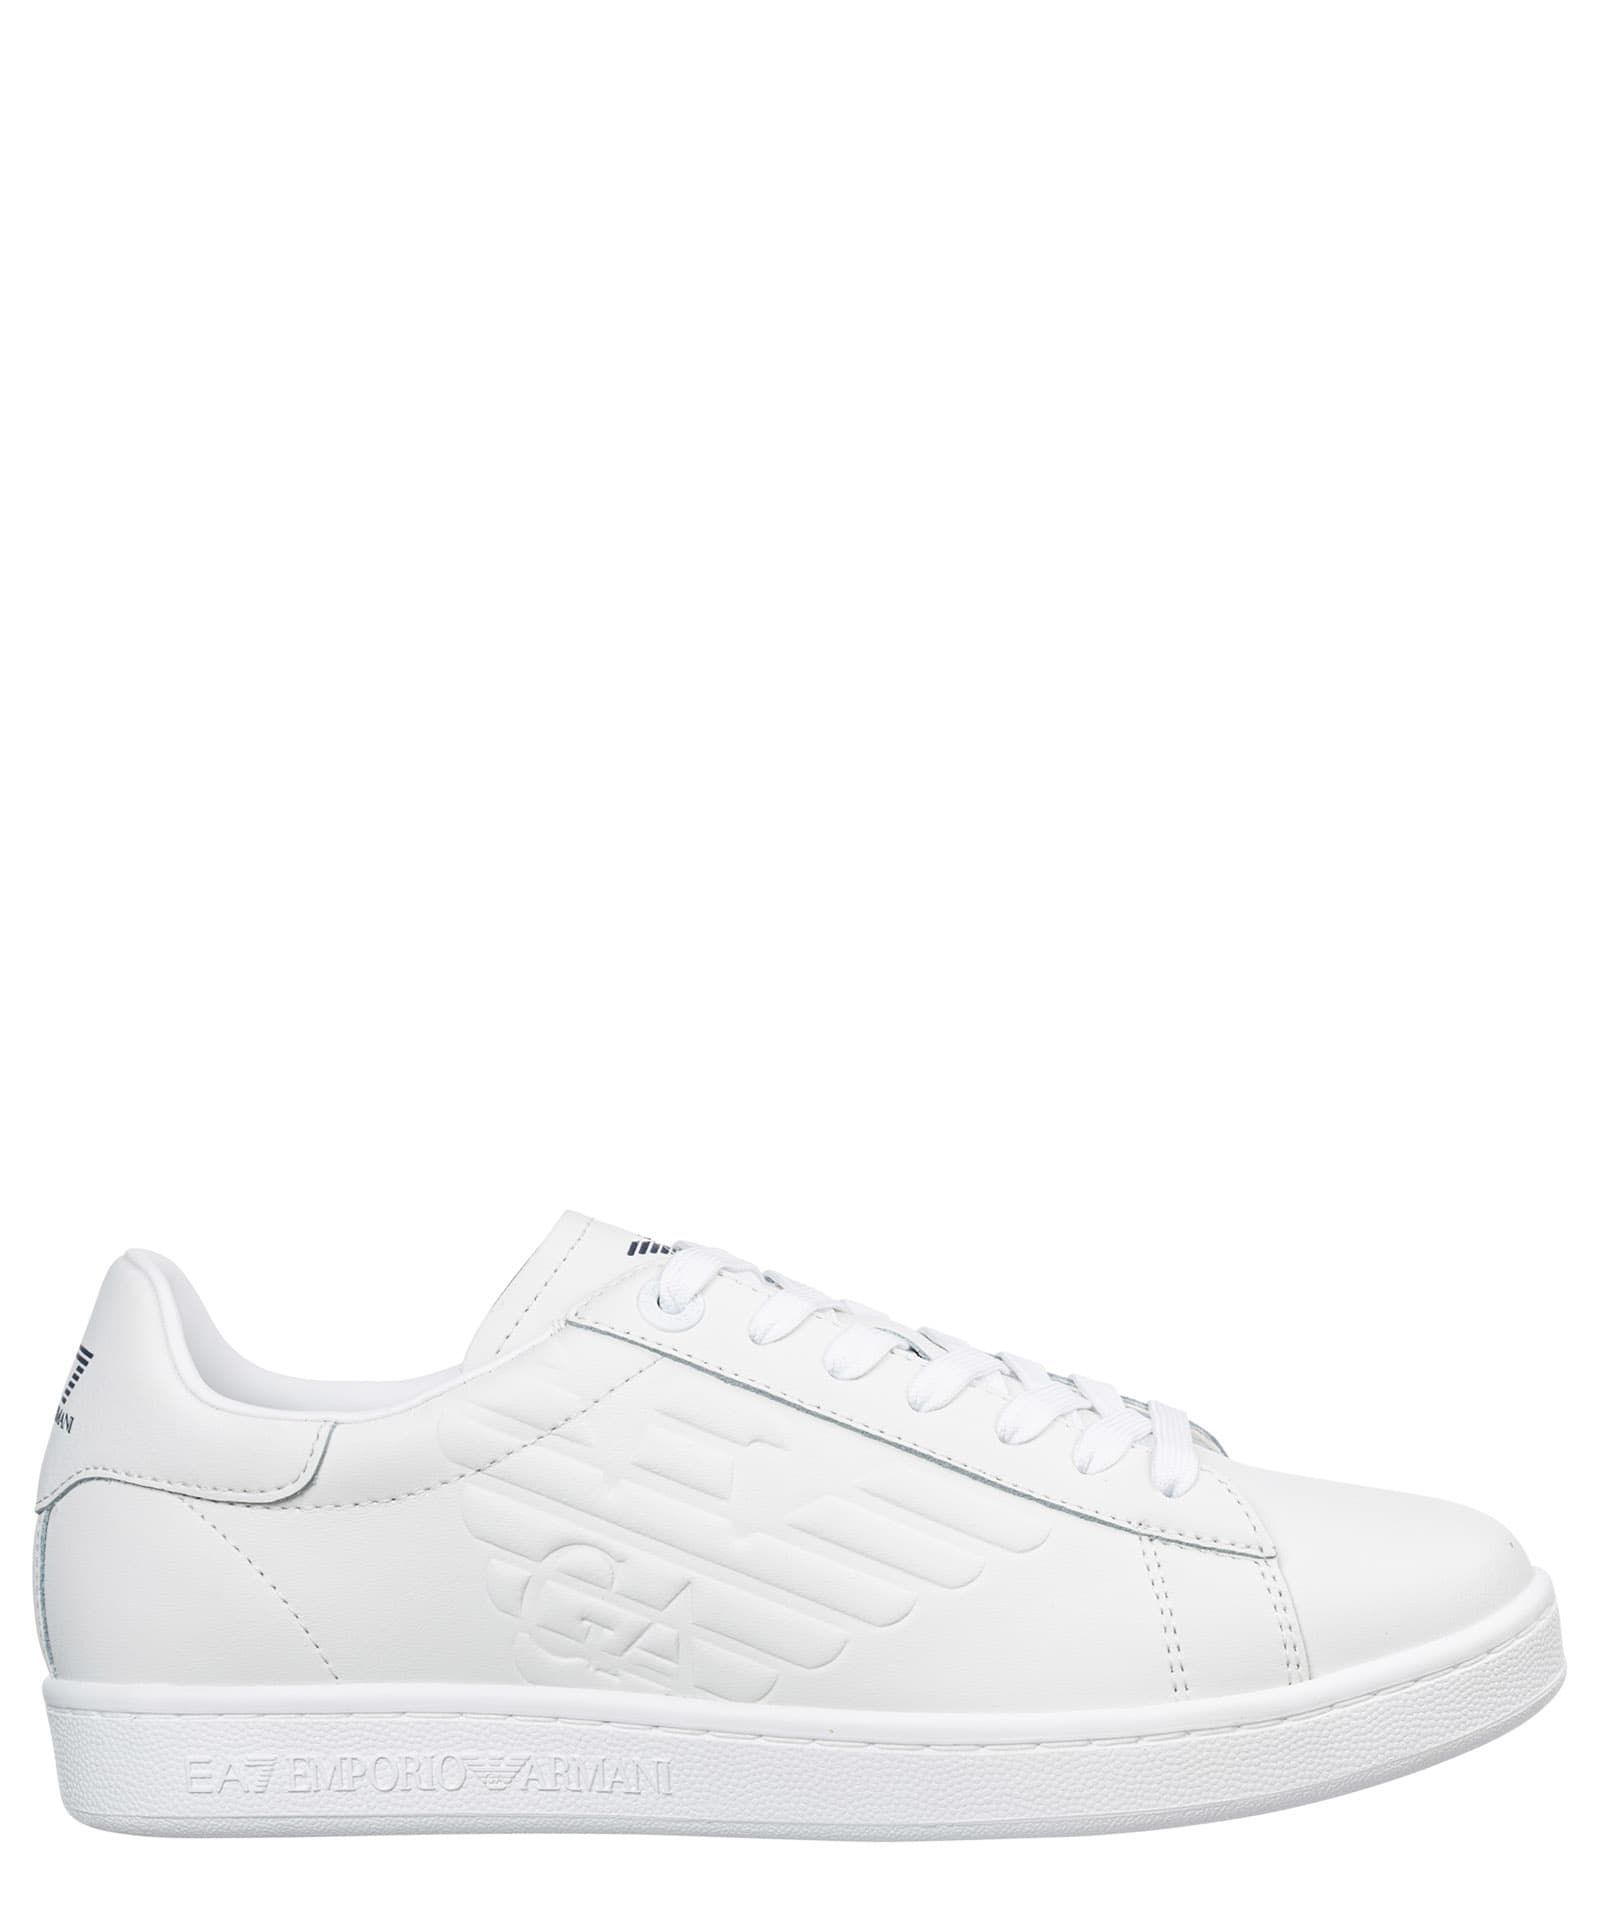 EA7 Classic New Cc Leather Sneakers